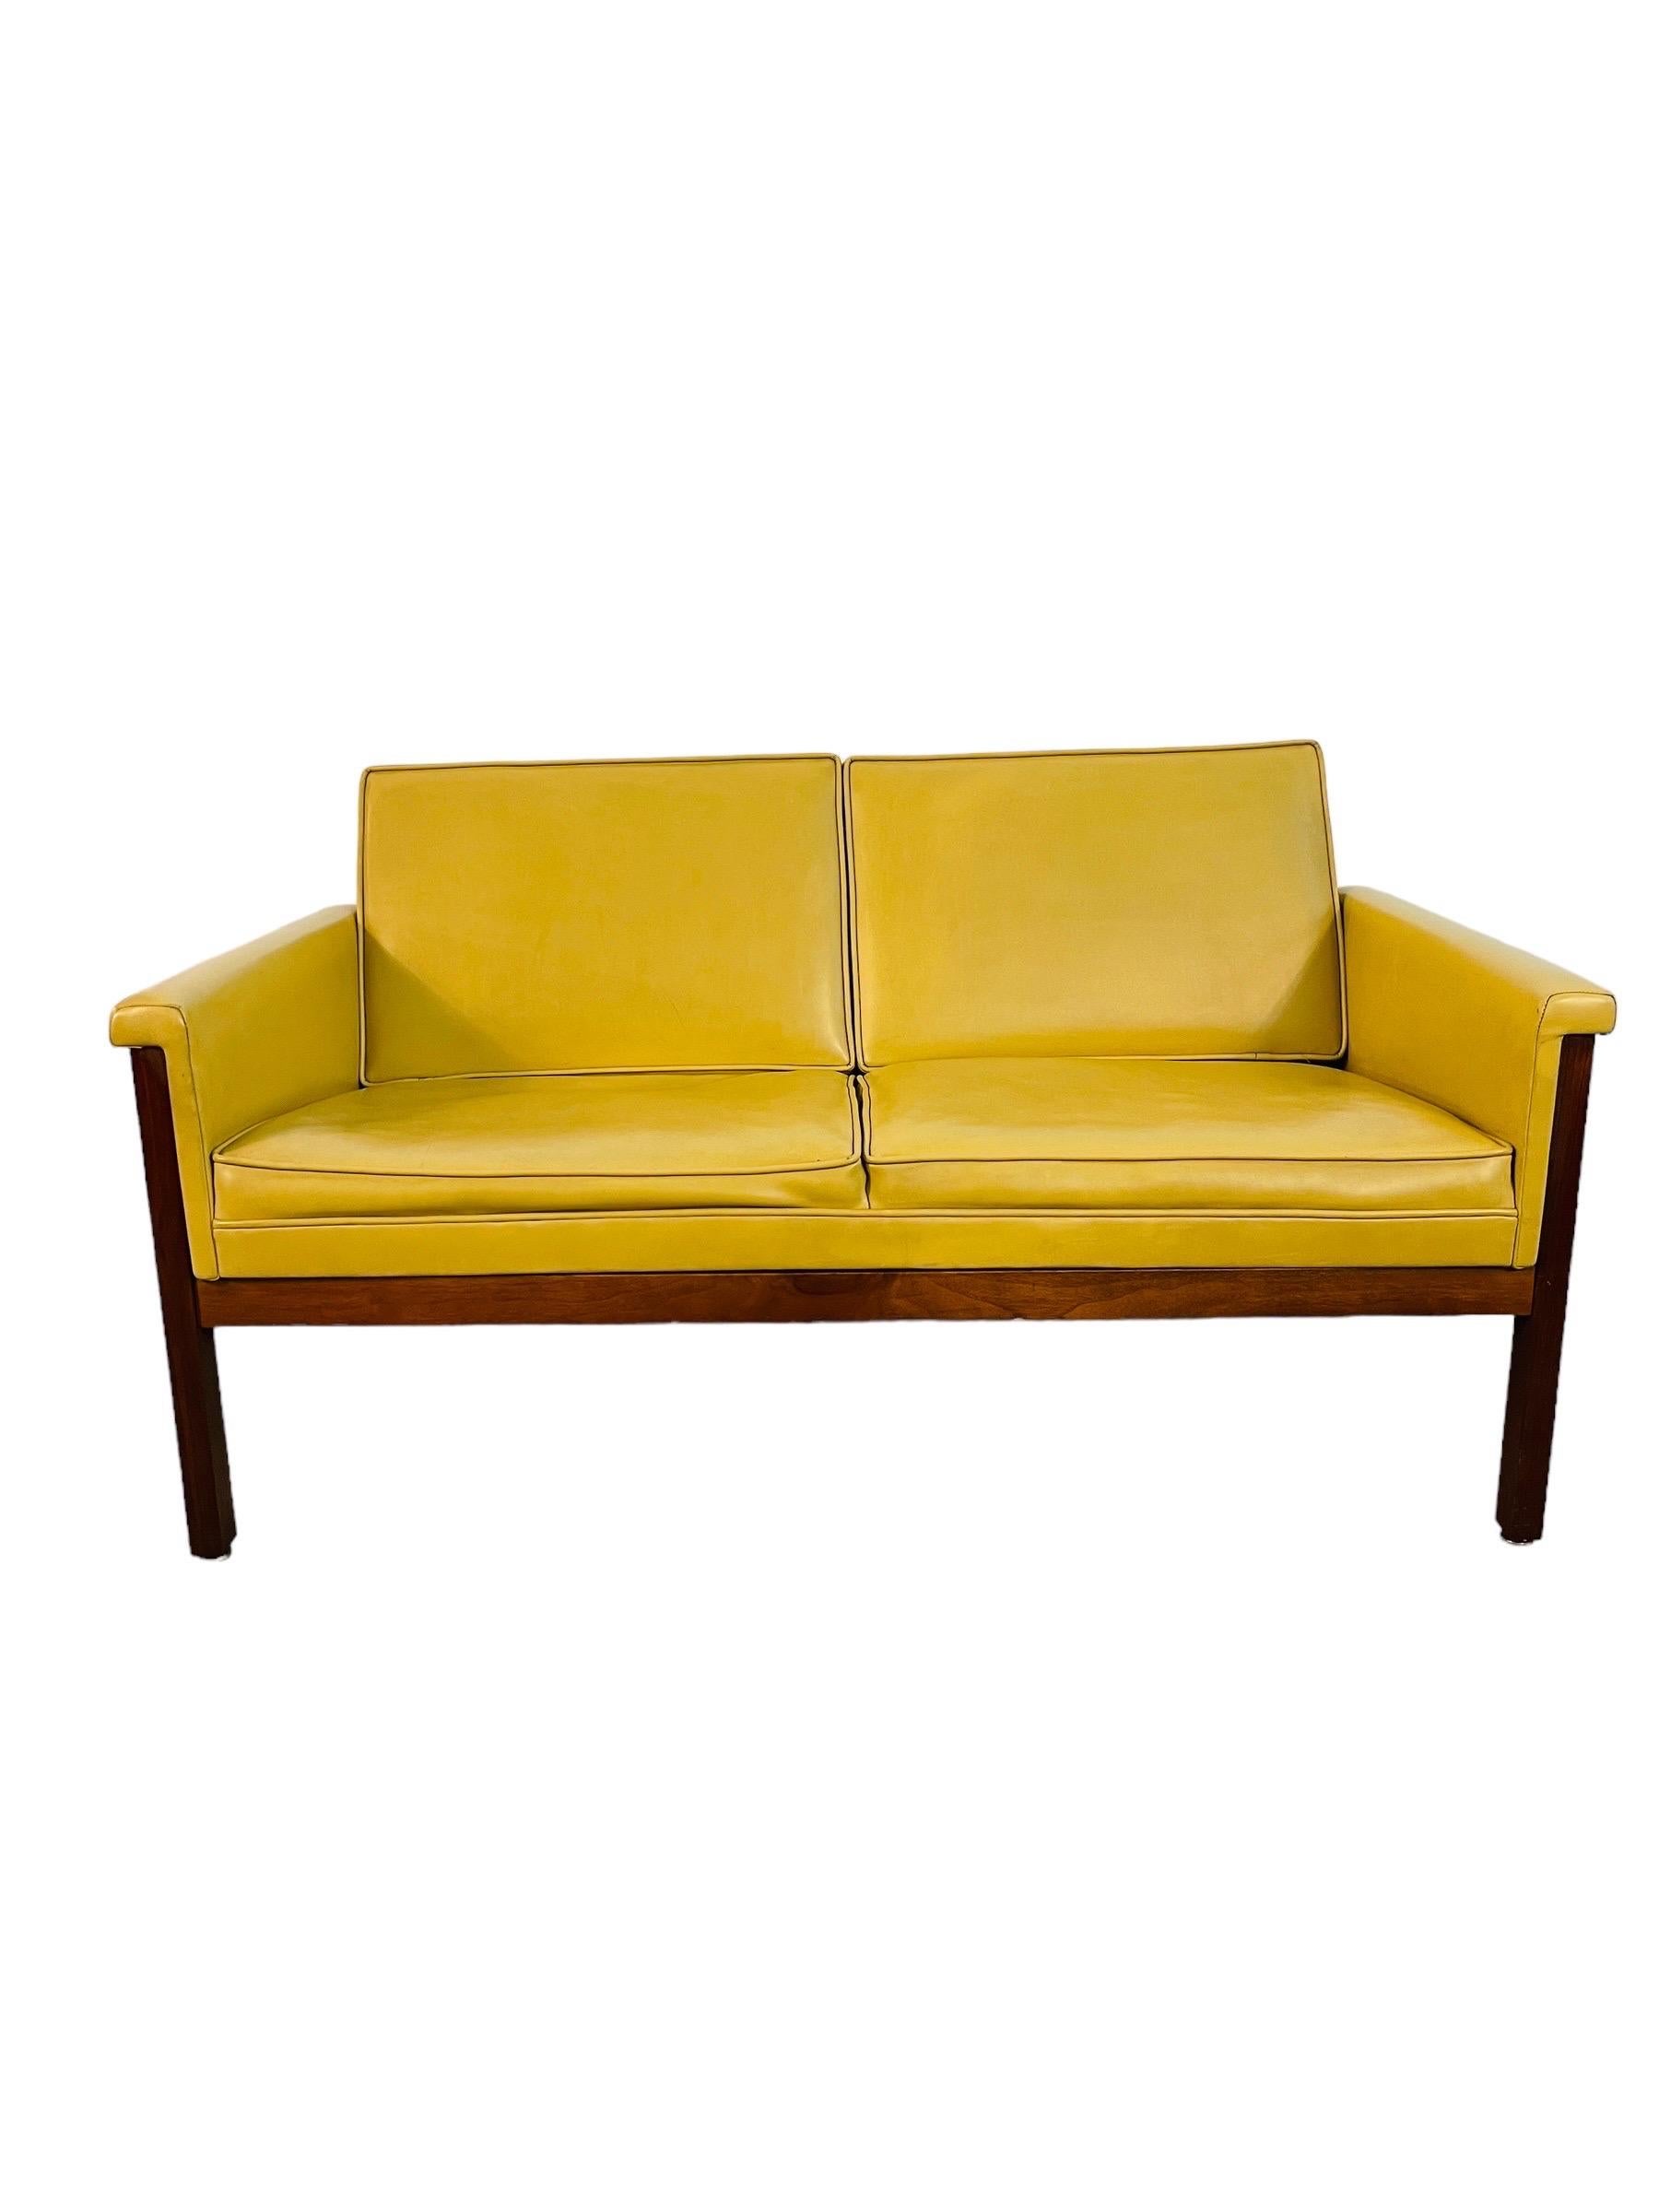 Introducing the latest showstopper at Heirloom Decor – the Thonet walnut loveseat. This Mid Century marvel pairs bold, sunny upholstery with the timeless elegance of a walnut frame. A perfect fusion of comfort and style, it promises to be the